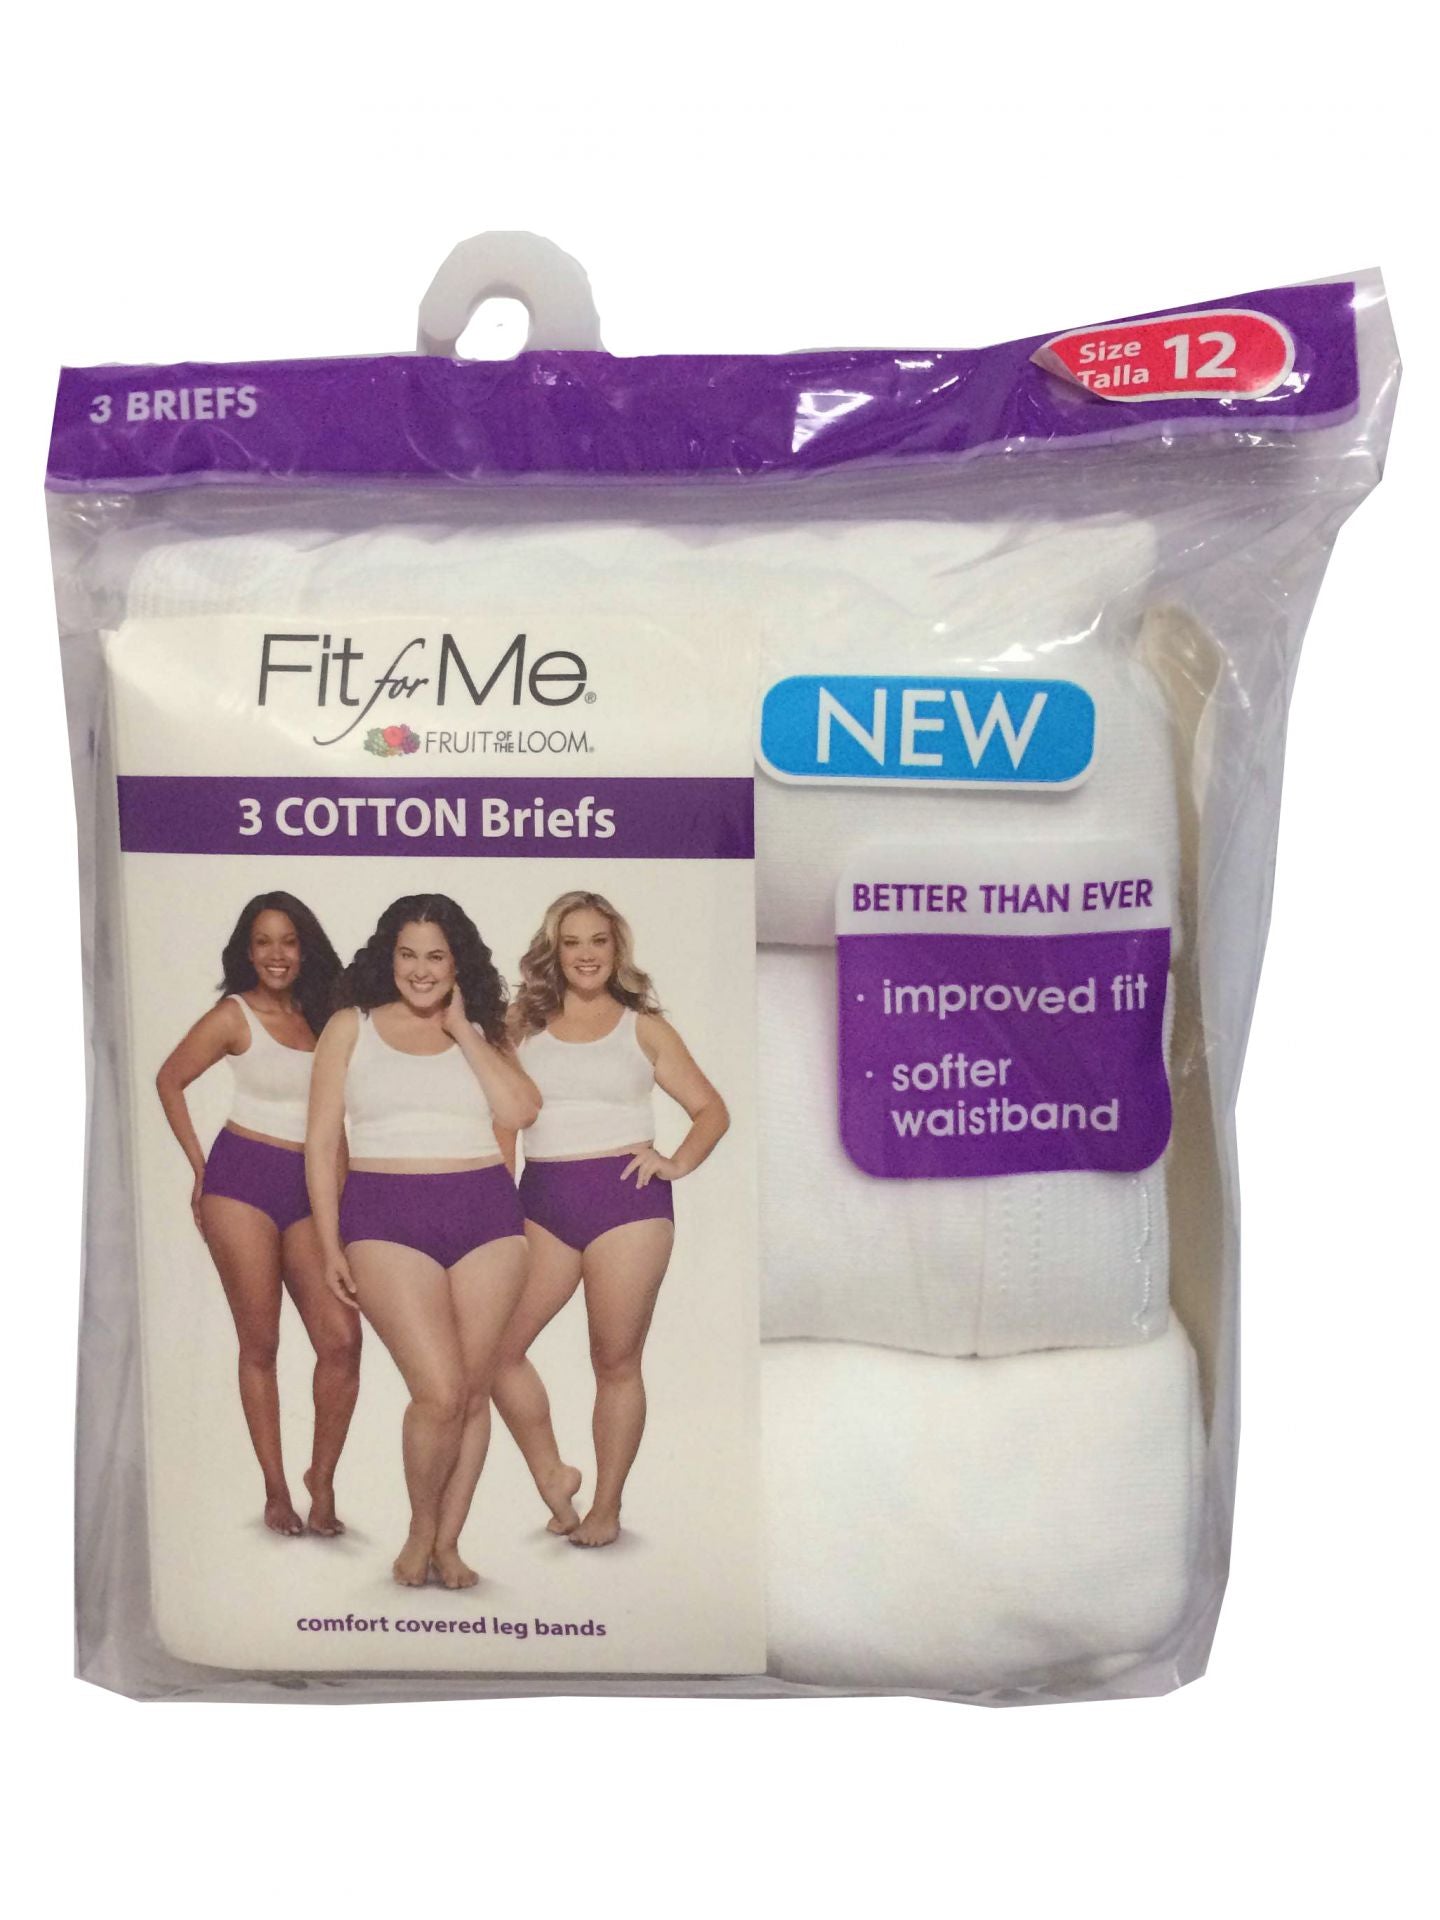 Upgrade Your Essentials: Women's Assorted Panty Pack Collection